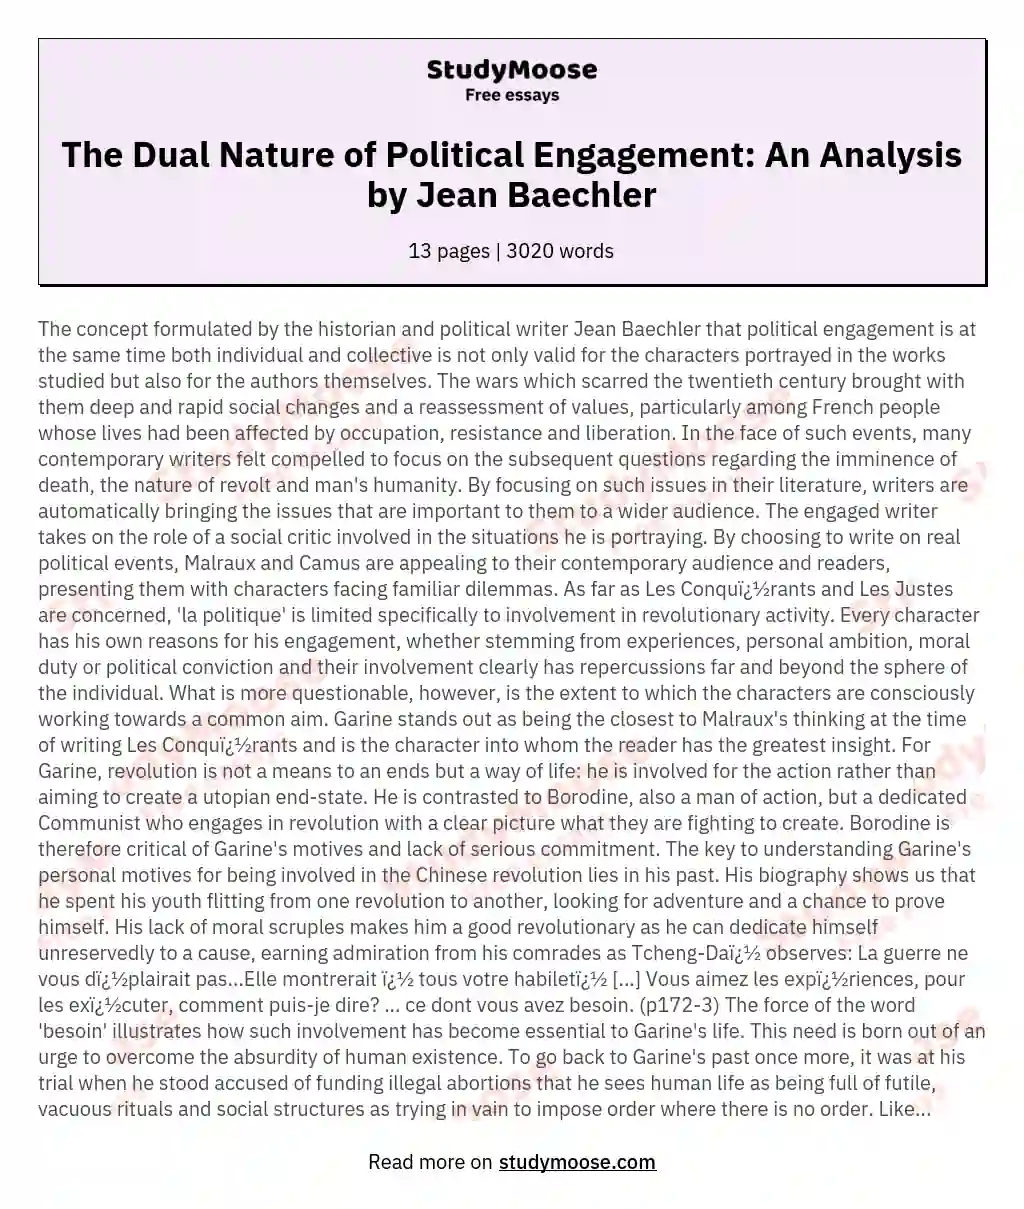 The Dual Nature of Political Engagement: An Analysis by Jean Baechler essay